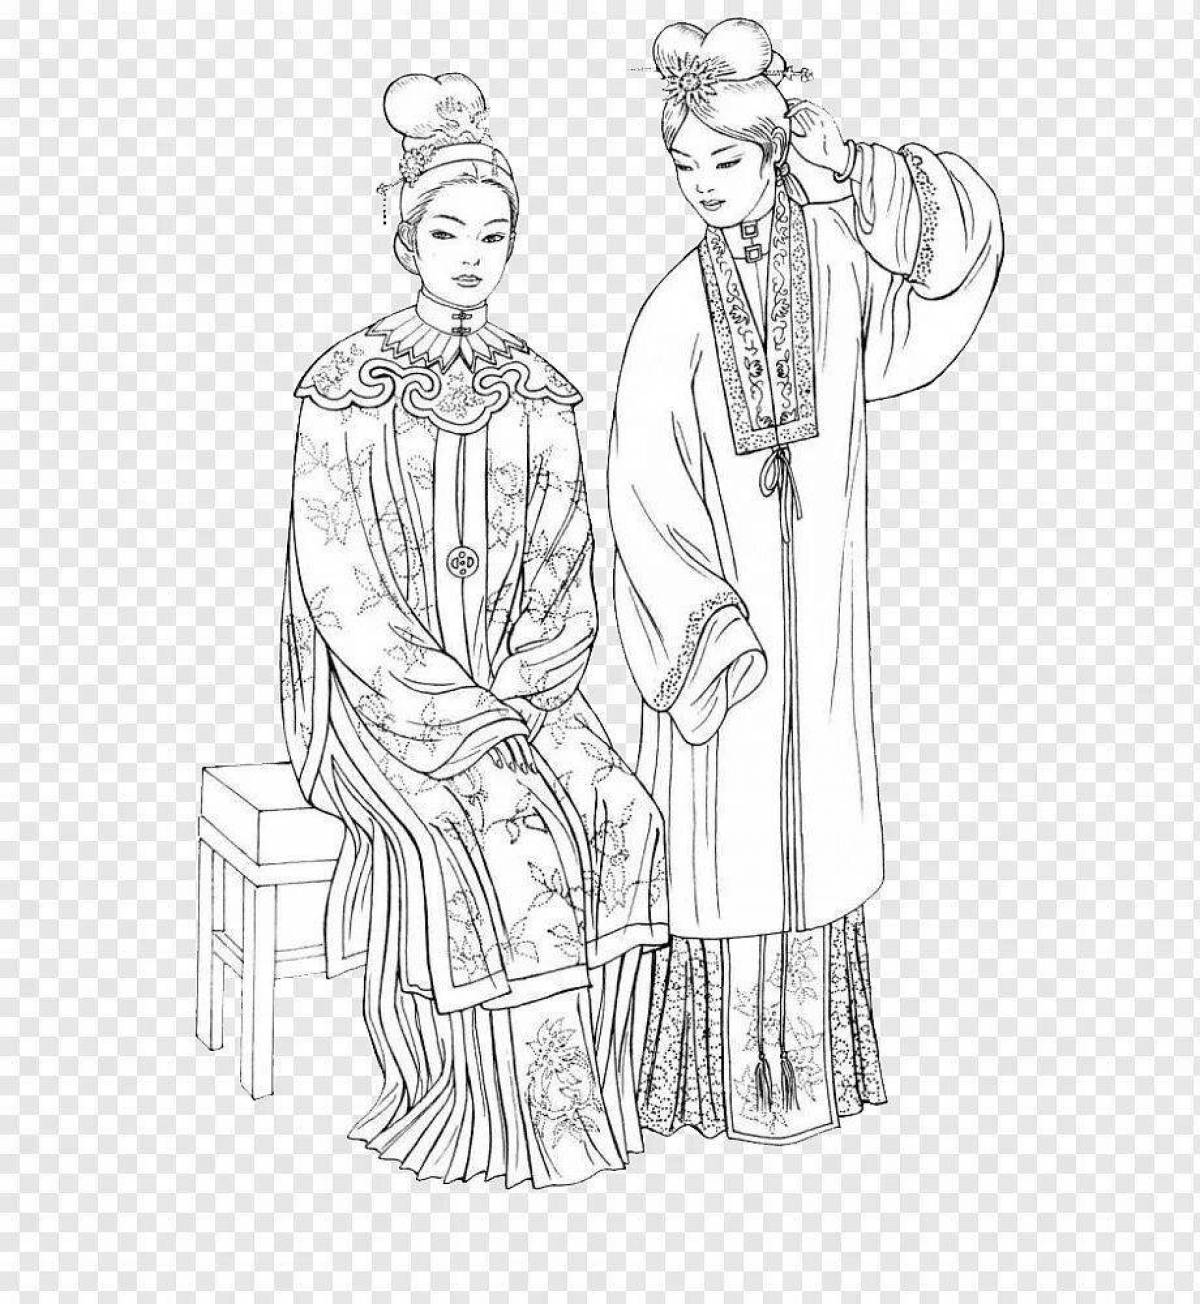 Colouring colorful Chinese folk clothes